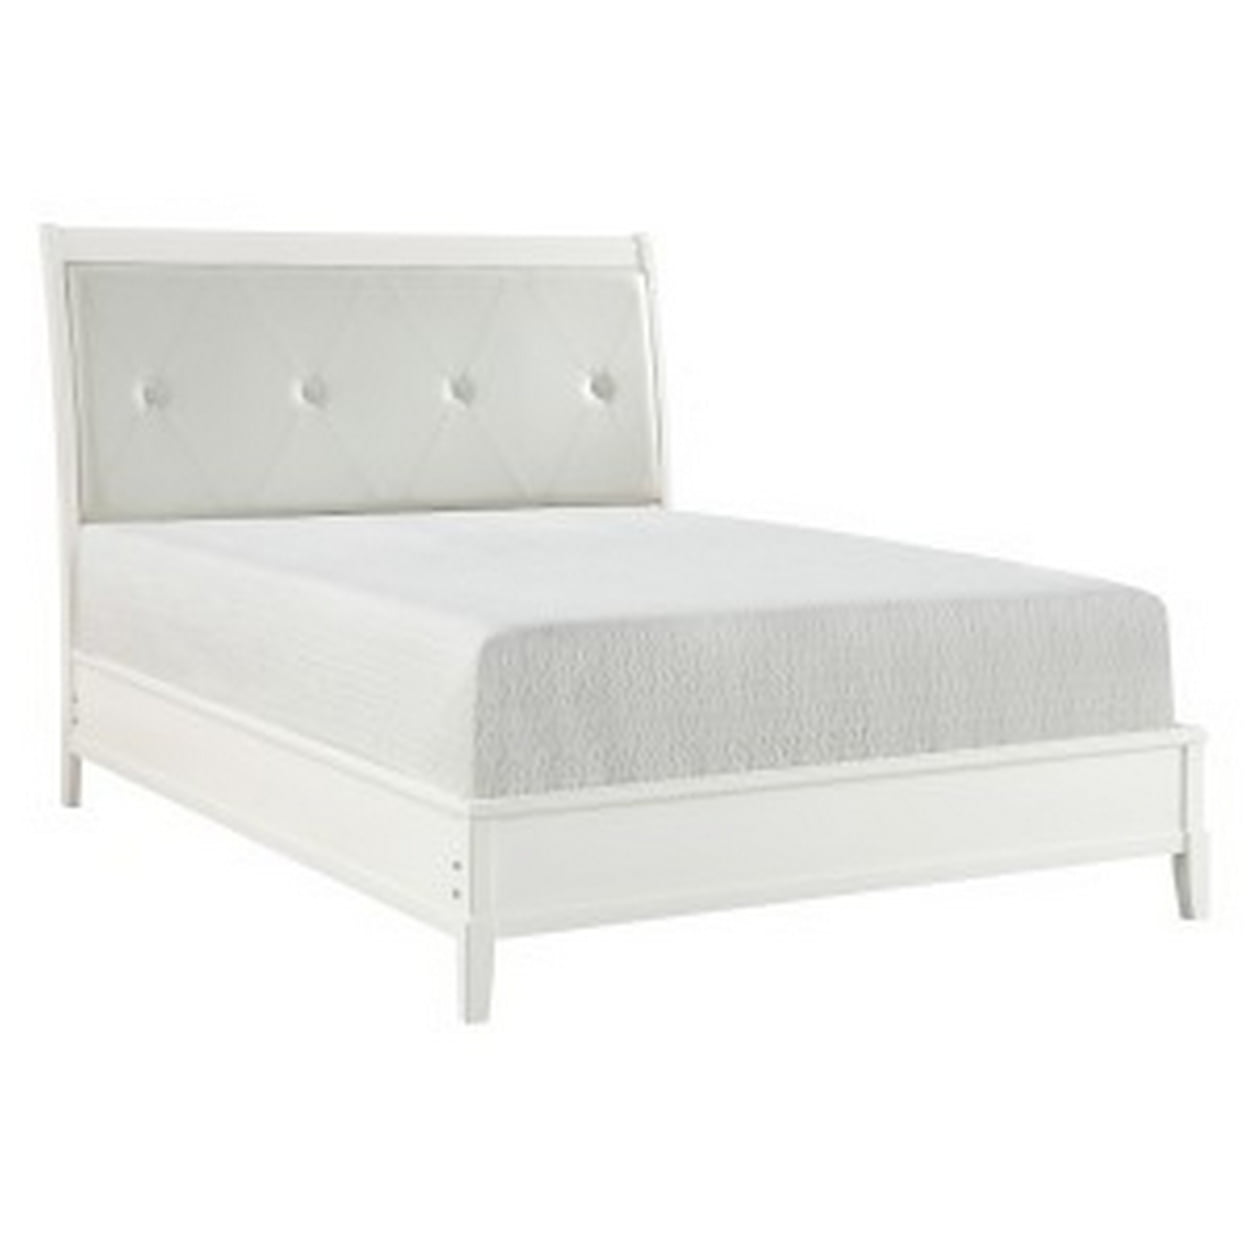 Hadly Classic Button Tufted Headboard Sleigh Bed, White - Queen Size -  DeluxDesigns, DE2805984